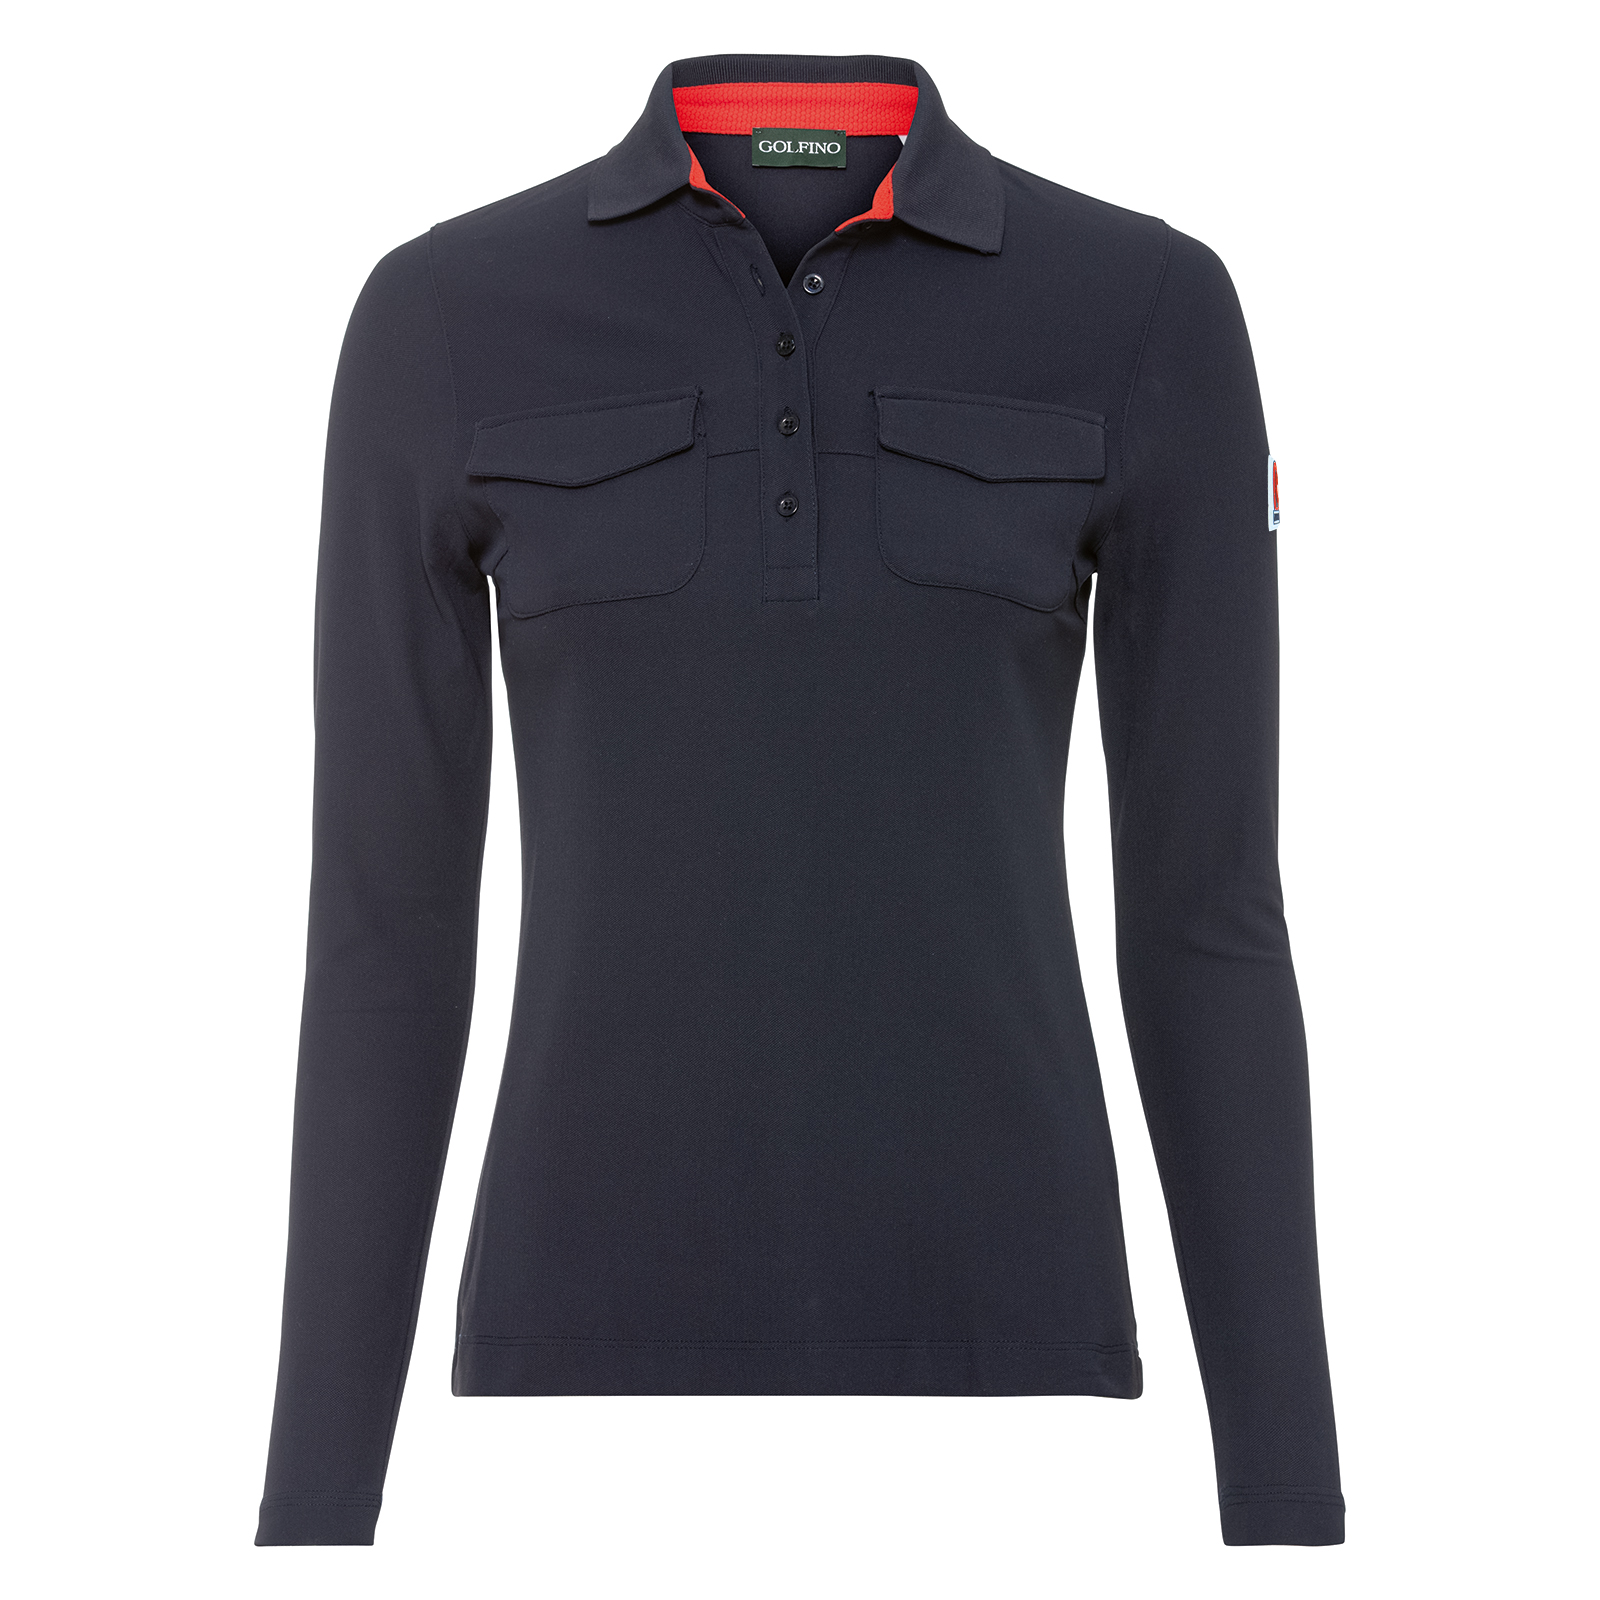 Ladies' long-sleeved polo shirt with patch pockets and signature logo